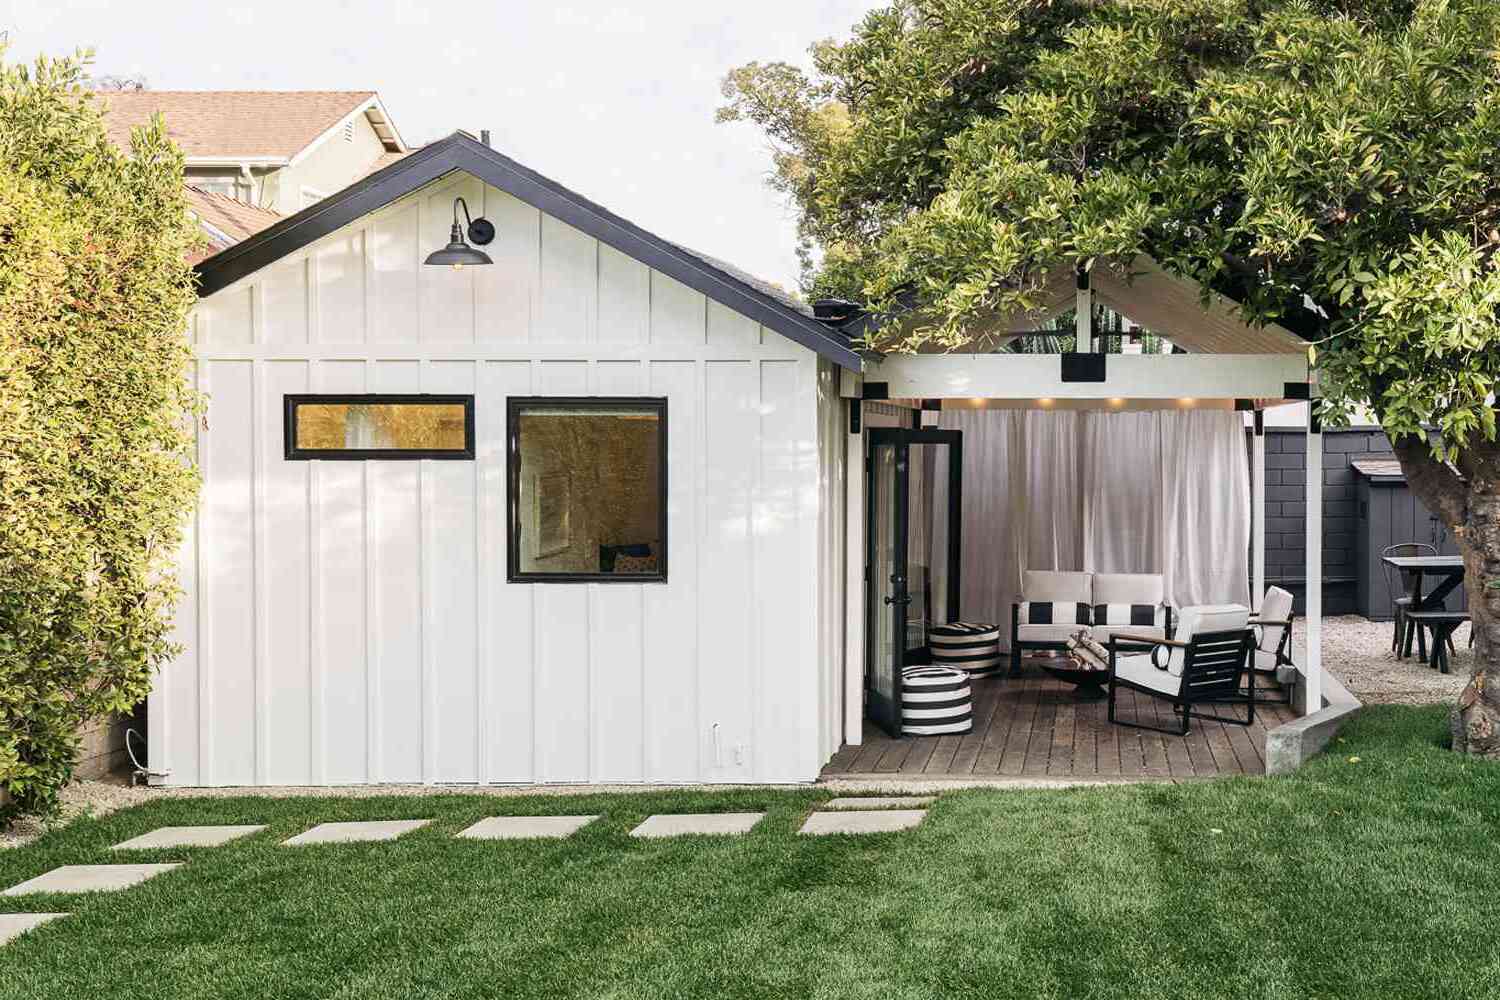 DIY Shed House: A Step-by-Step Guide To Building Your Own